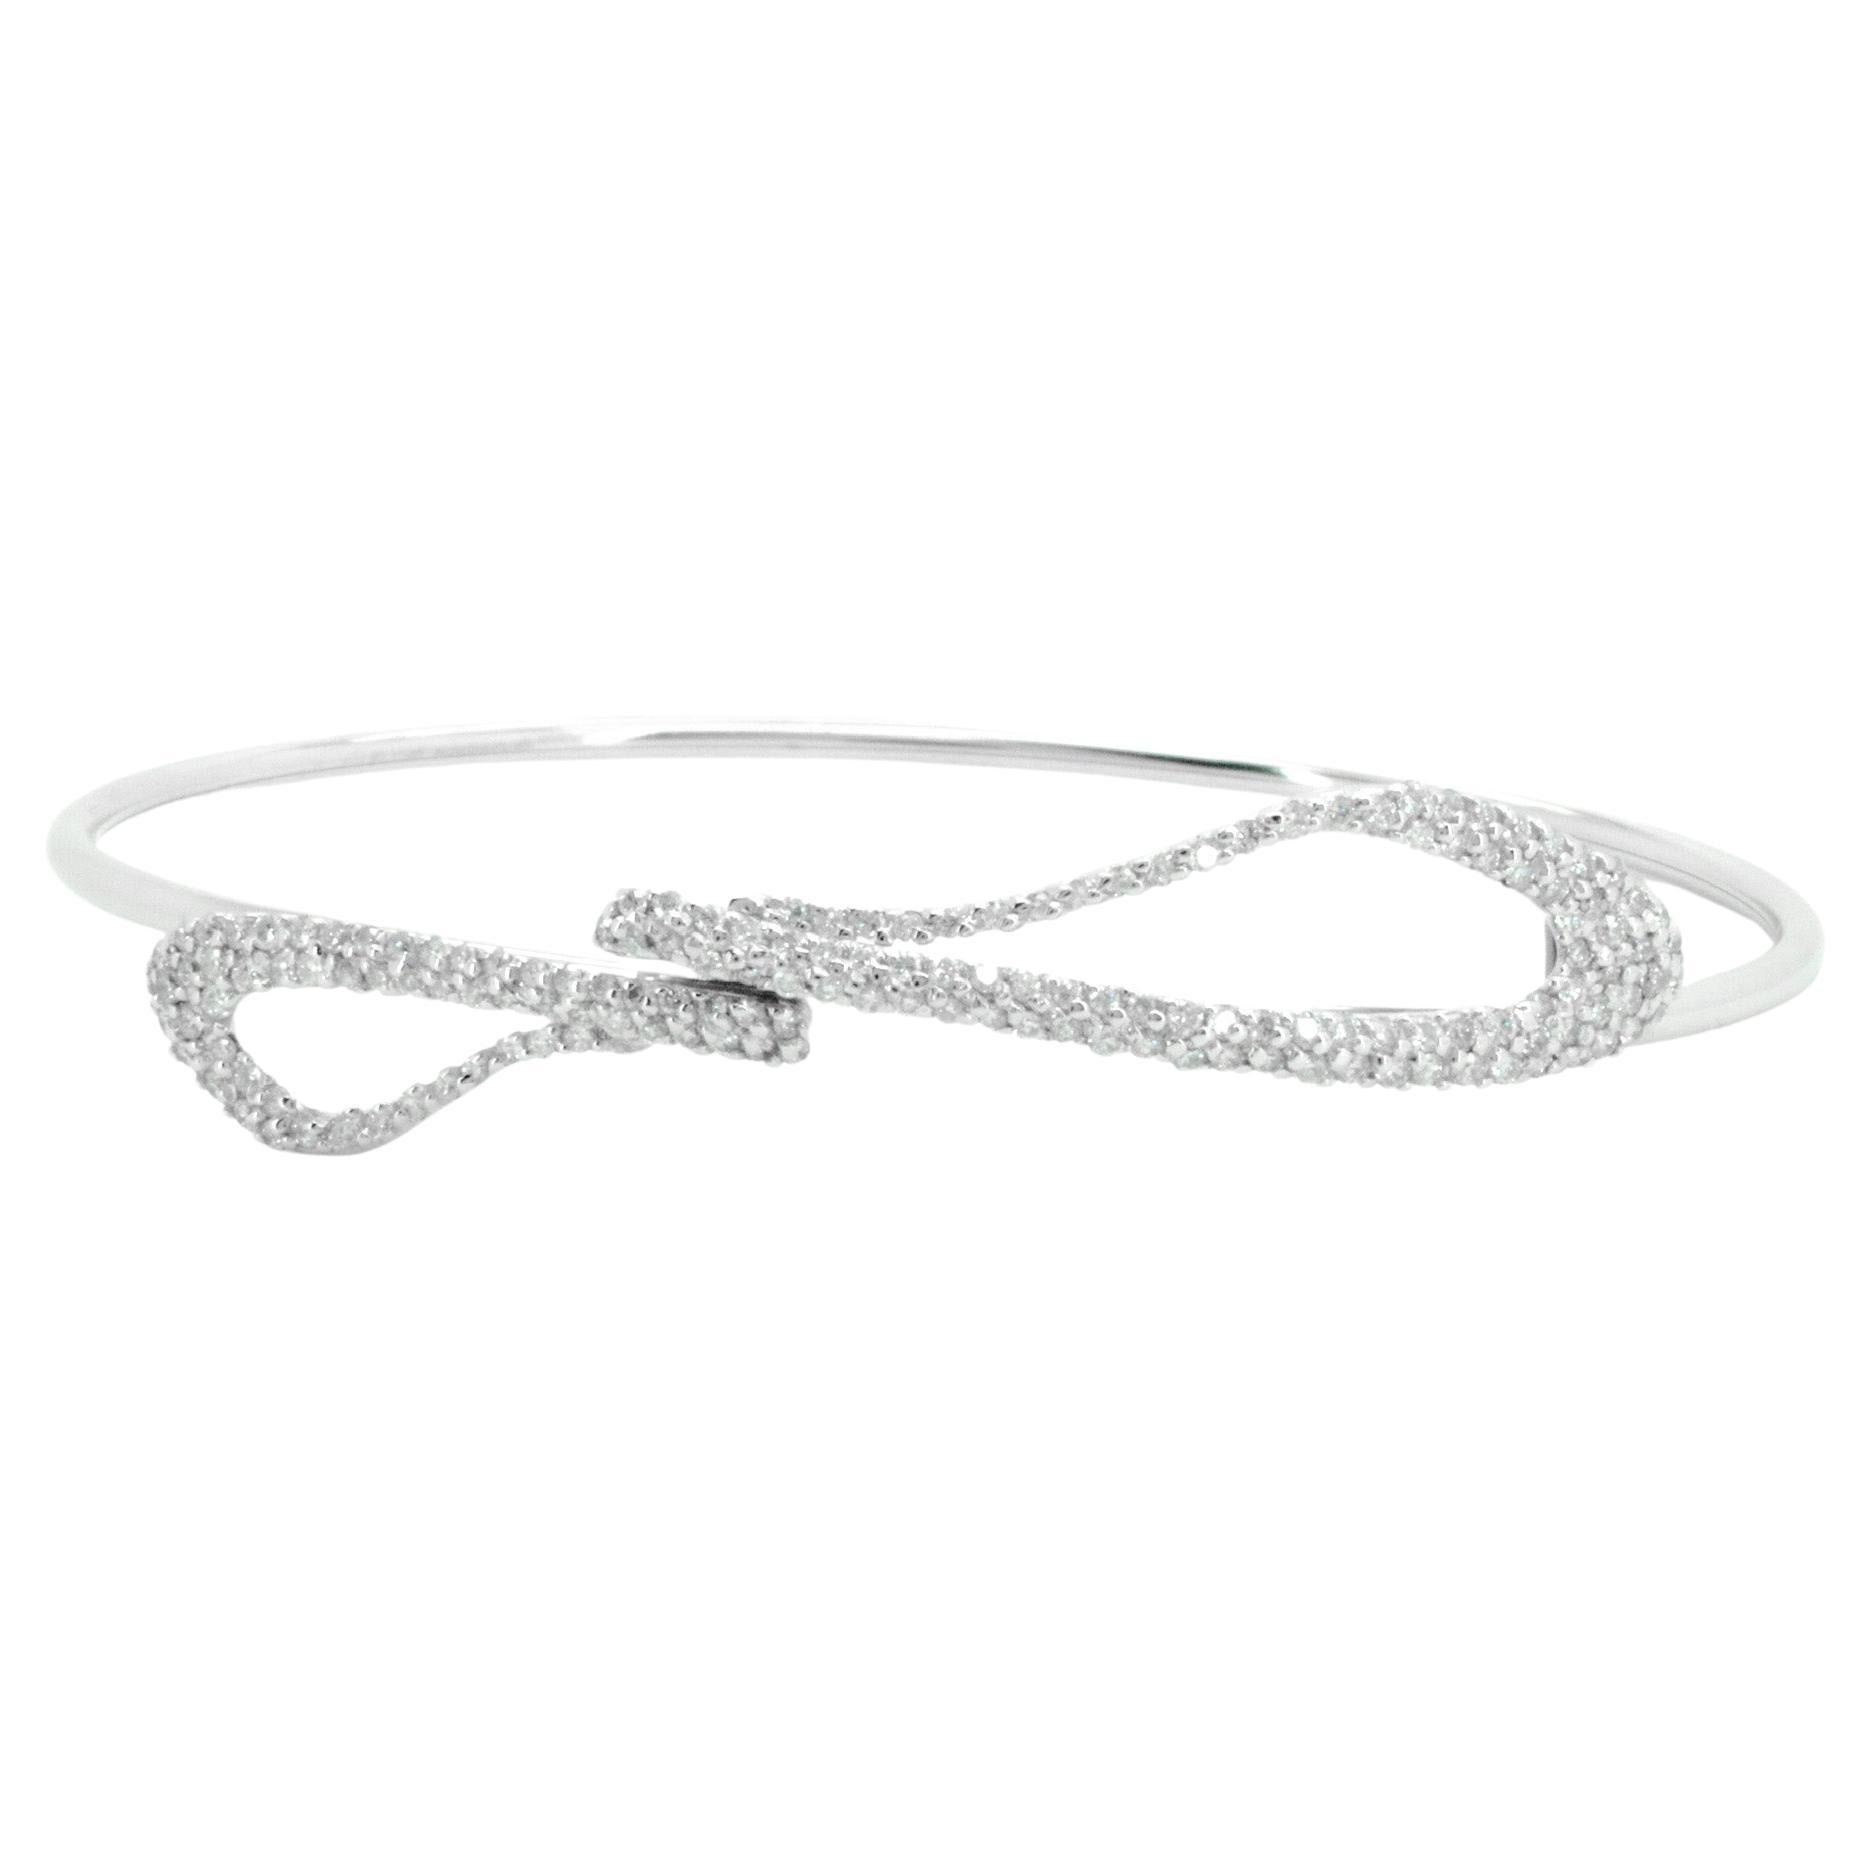 Modern Beatrice Barzaghi Diamond Pave White Gold Ethereal Delicate Cuff Bracelet For Sale